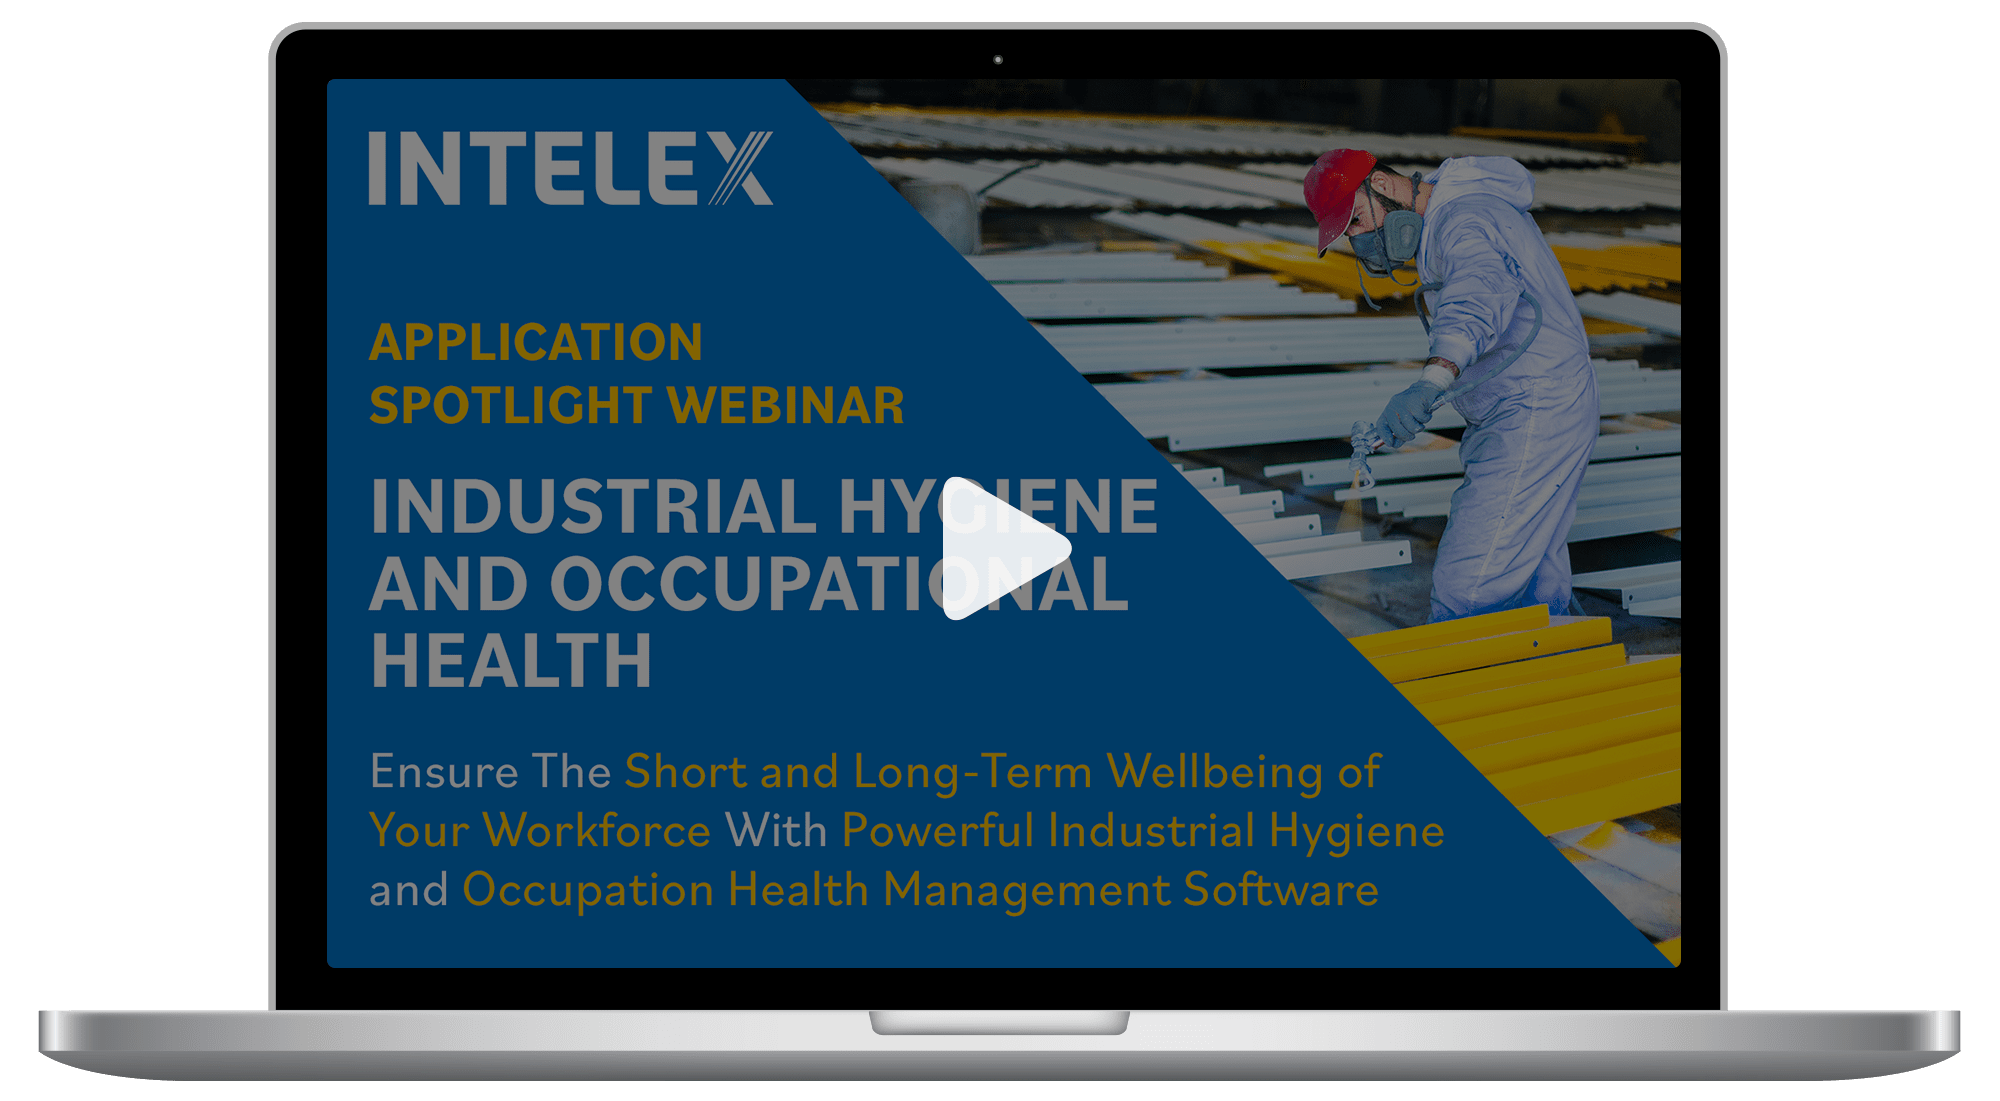 Industrial Hygiene and Occupational Health Software Demo - Intelex